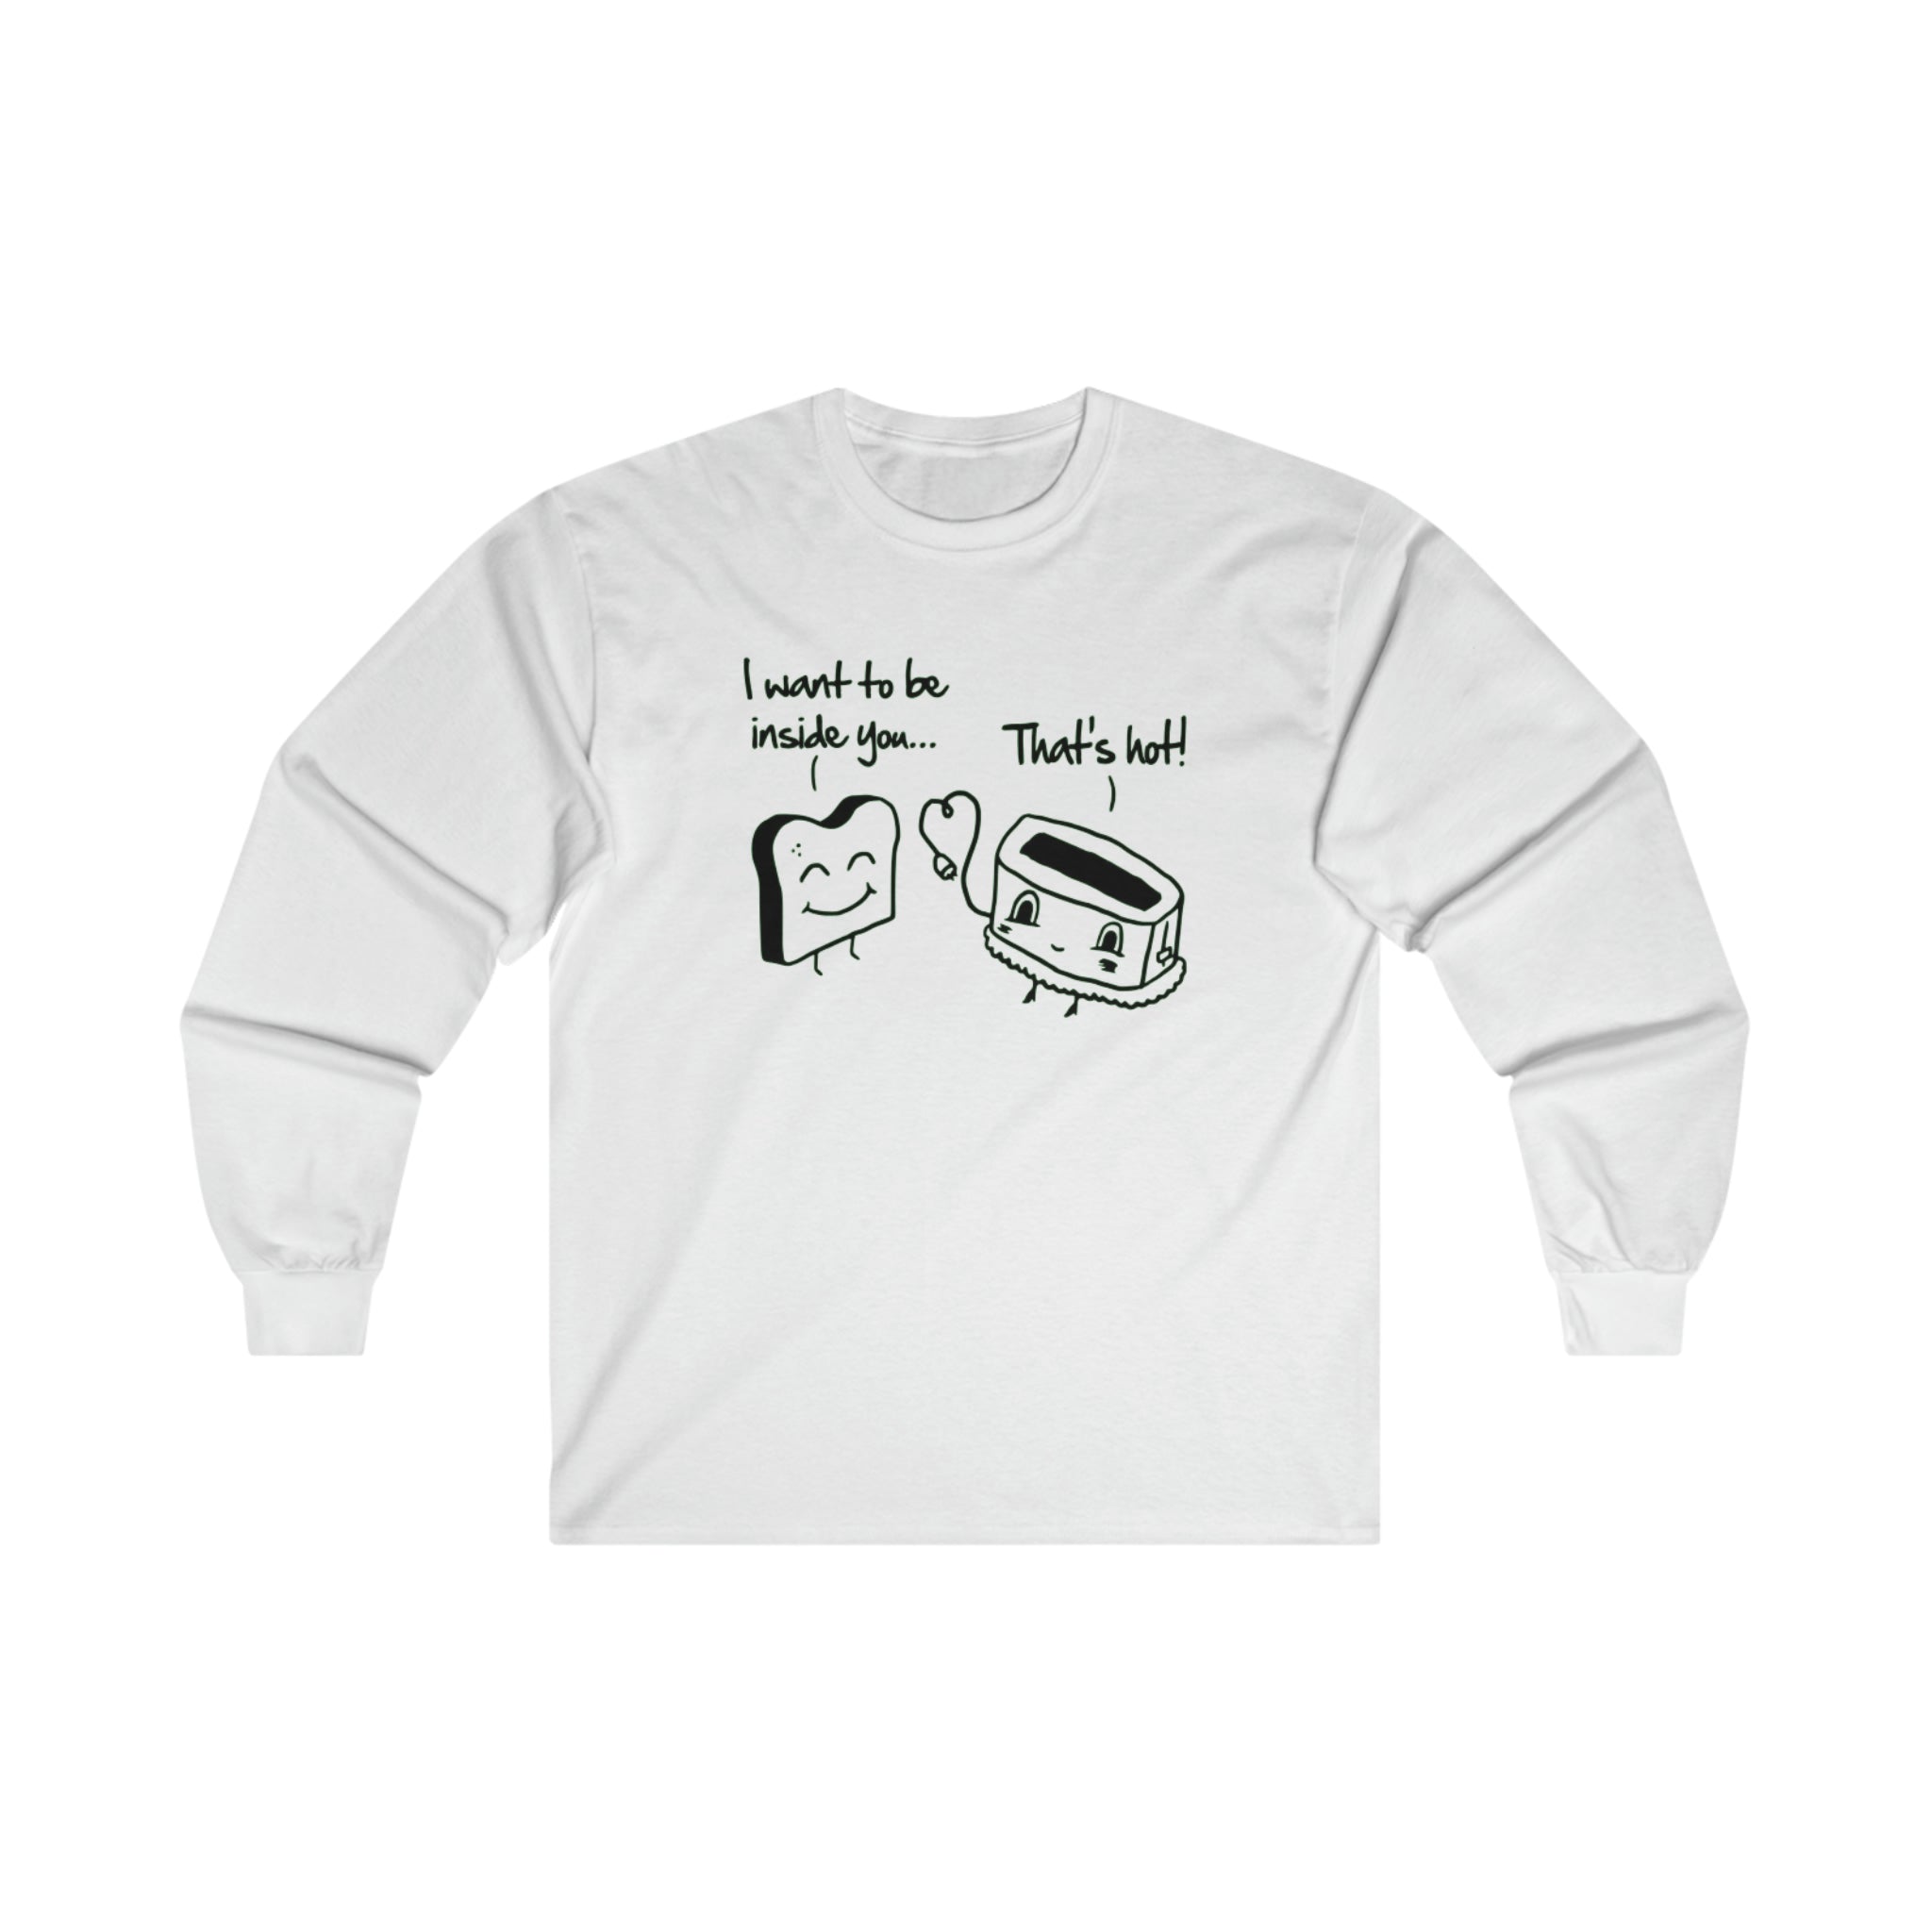 Toaster and Bread Couples Long-Sleeve T-Shirt